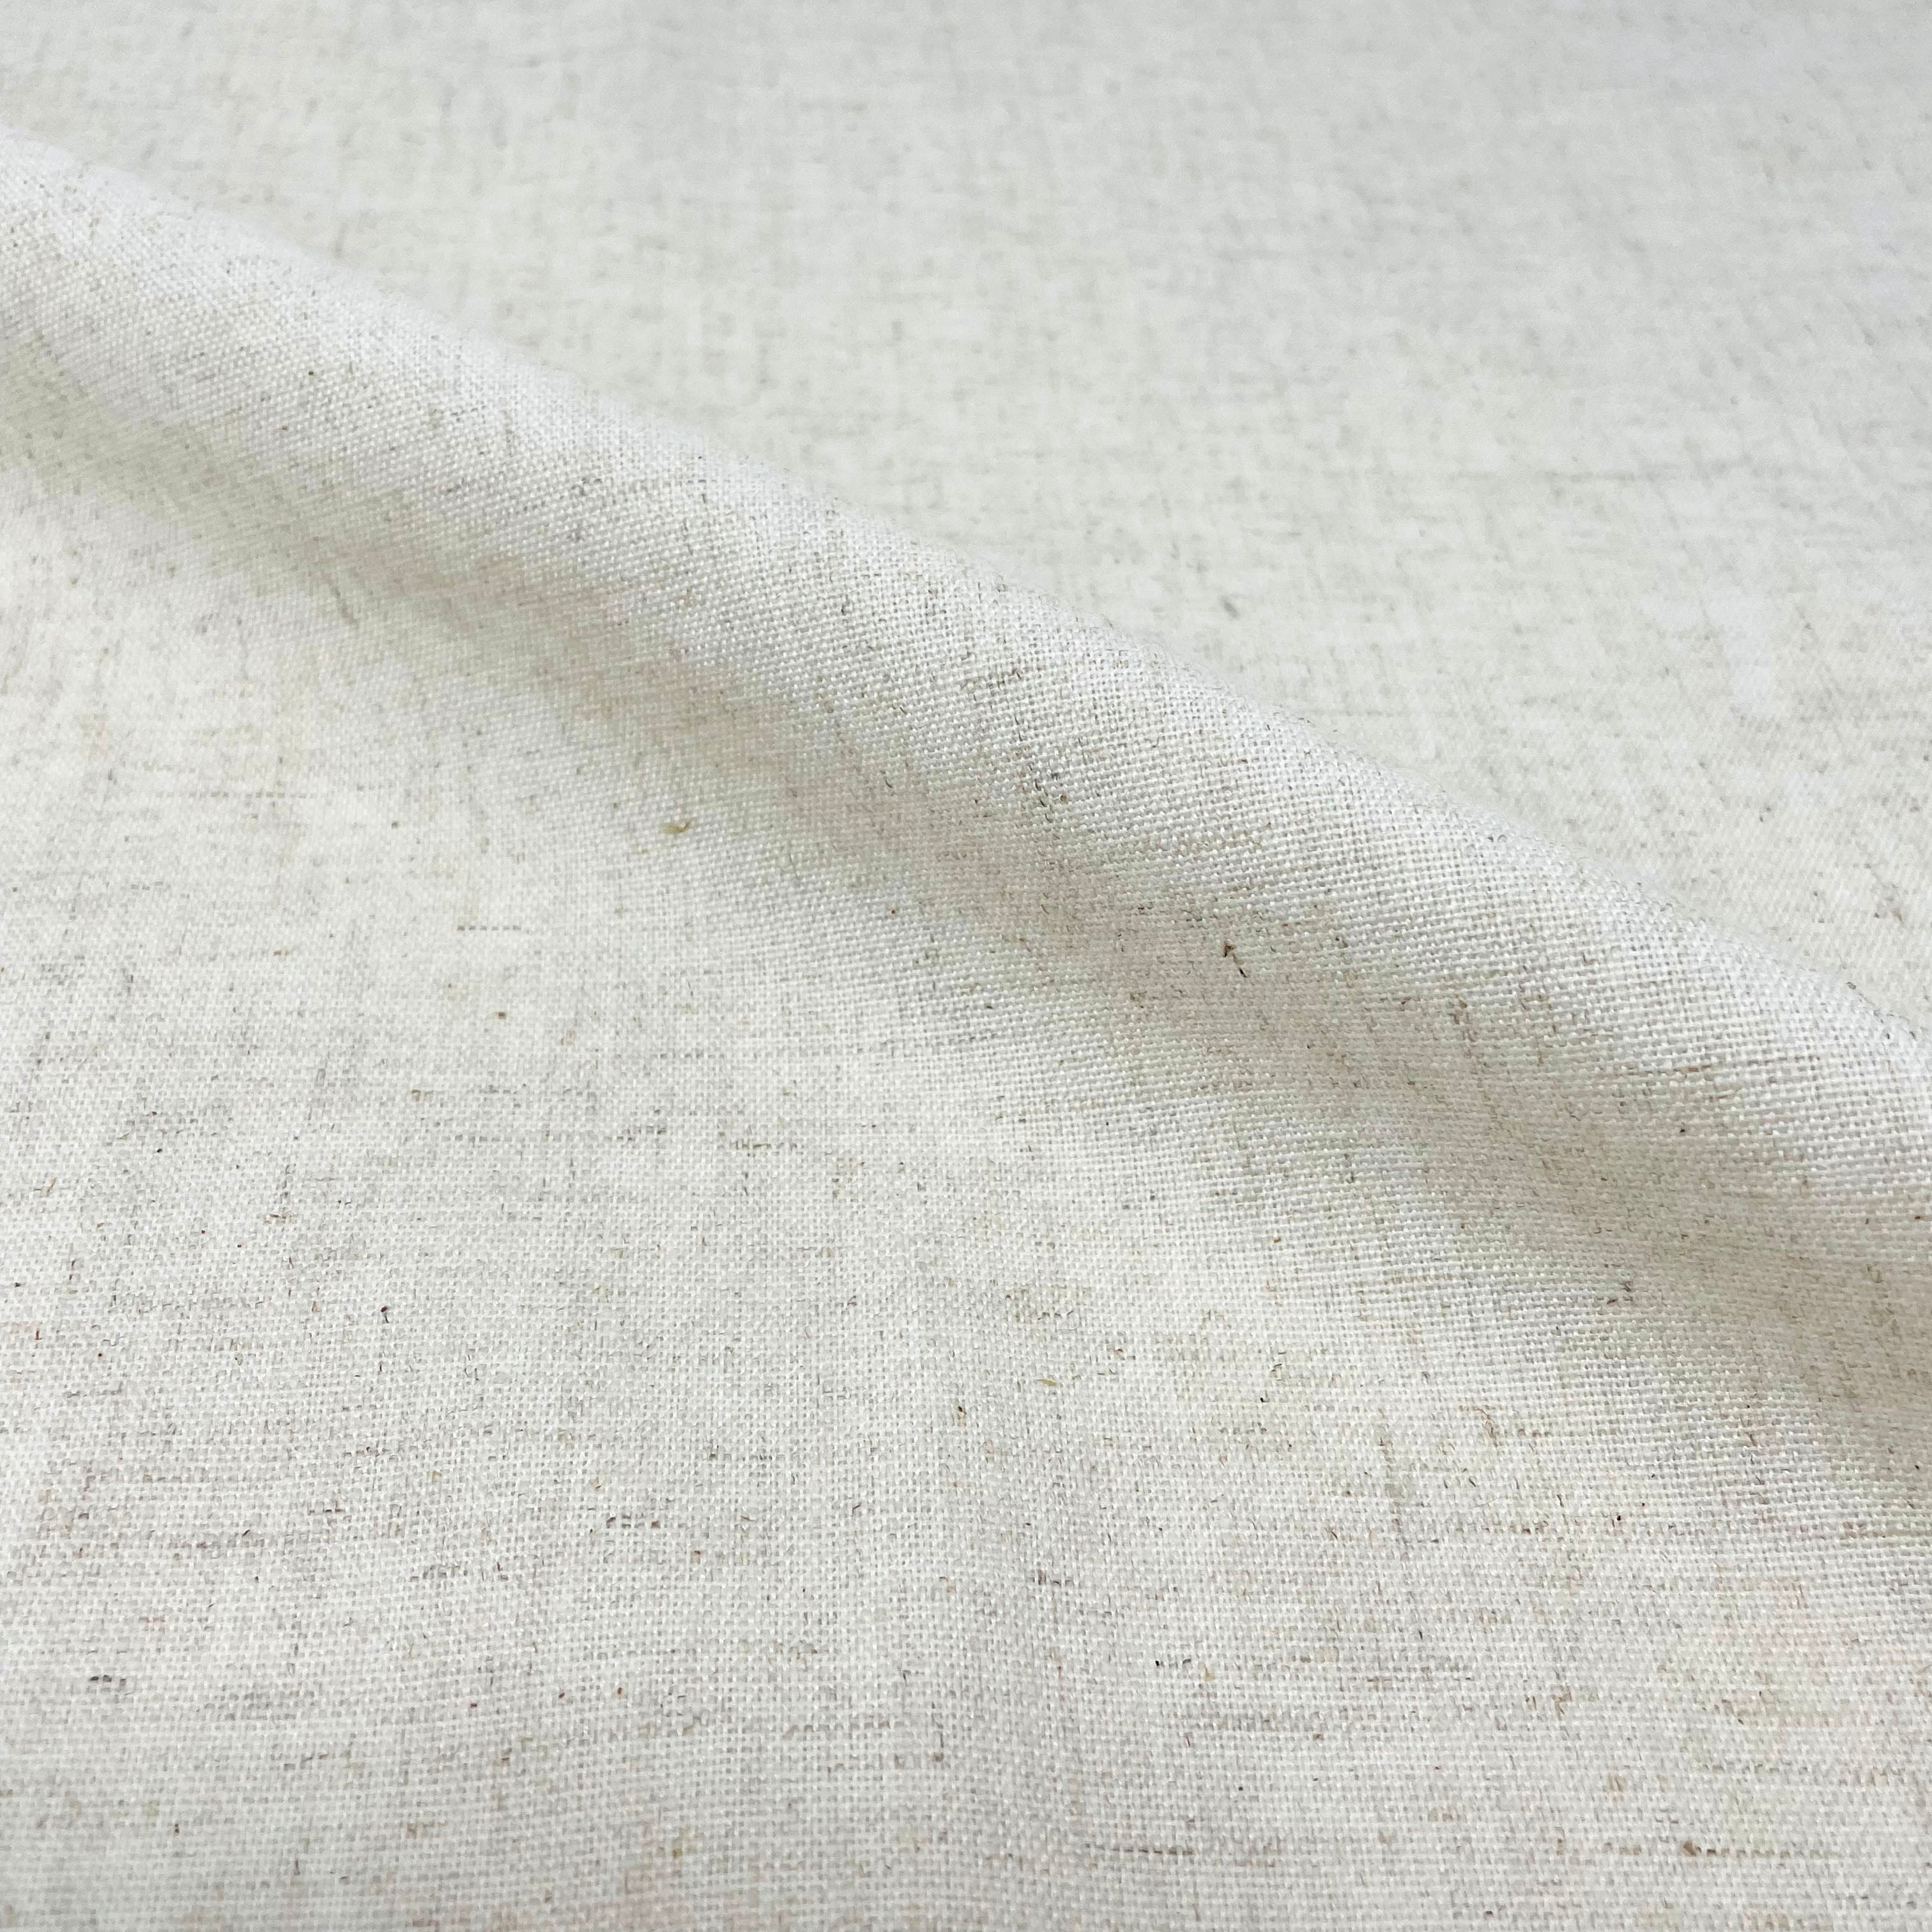 Blend Linen Fabric By The Yard, Curtain, Drapery, Table Top, 54" Width/CL1048